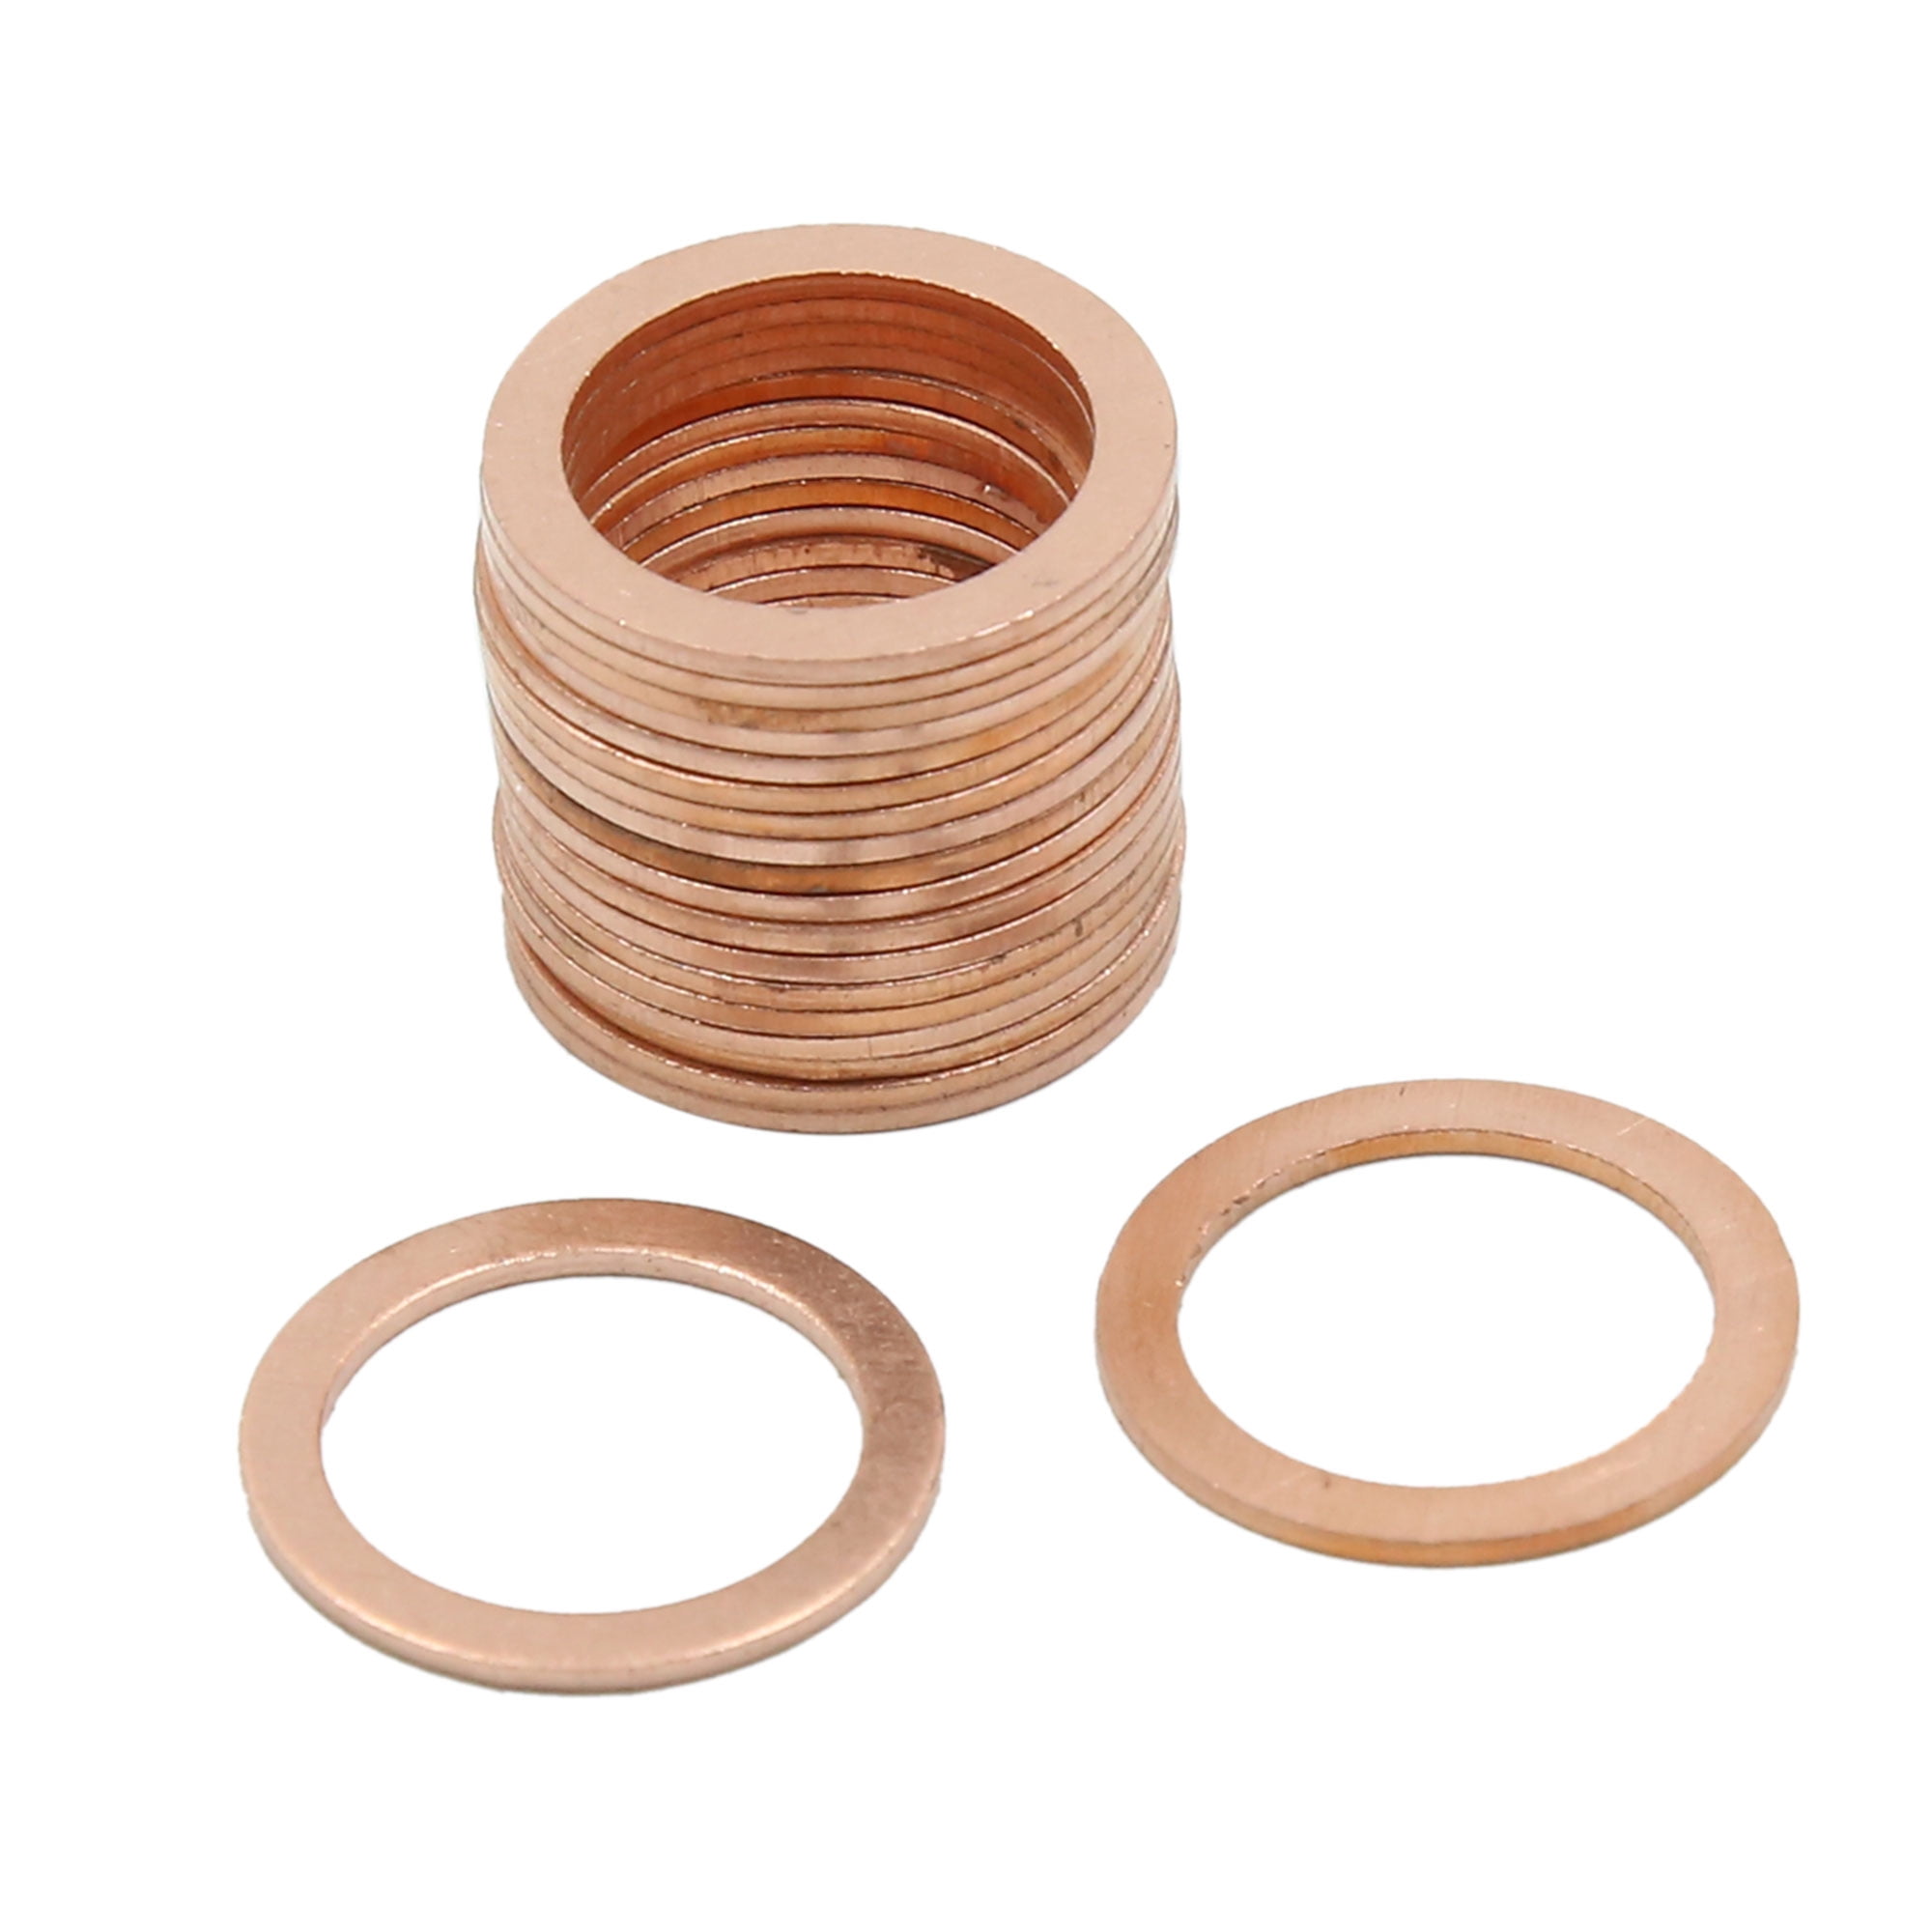 Bango Flat 16mm x 24mm x 2mm Seal *Top Quality! Copper washers Pack of 5 